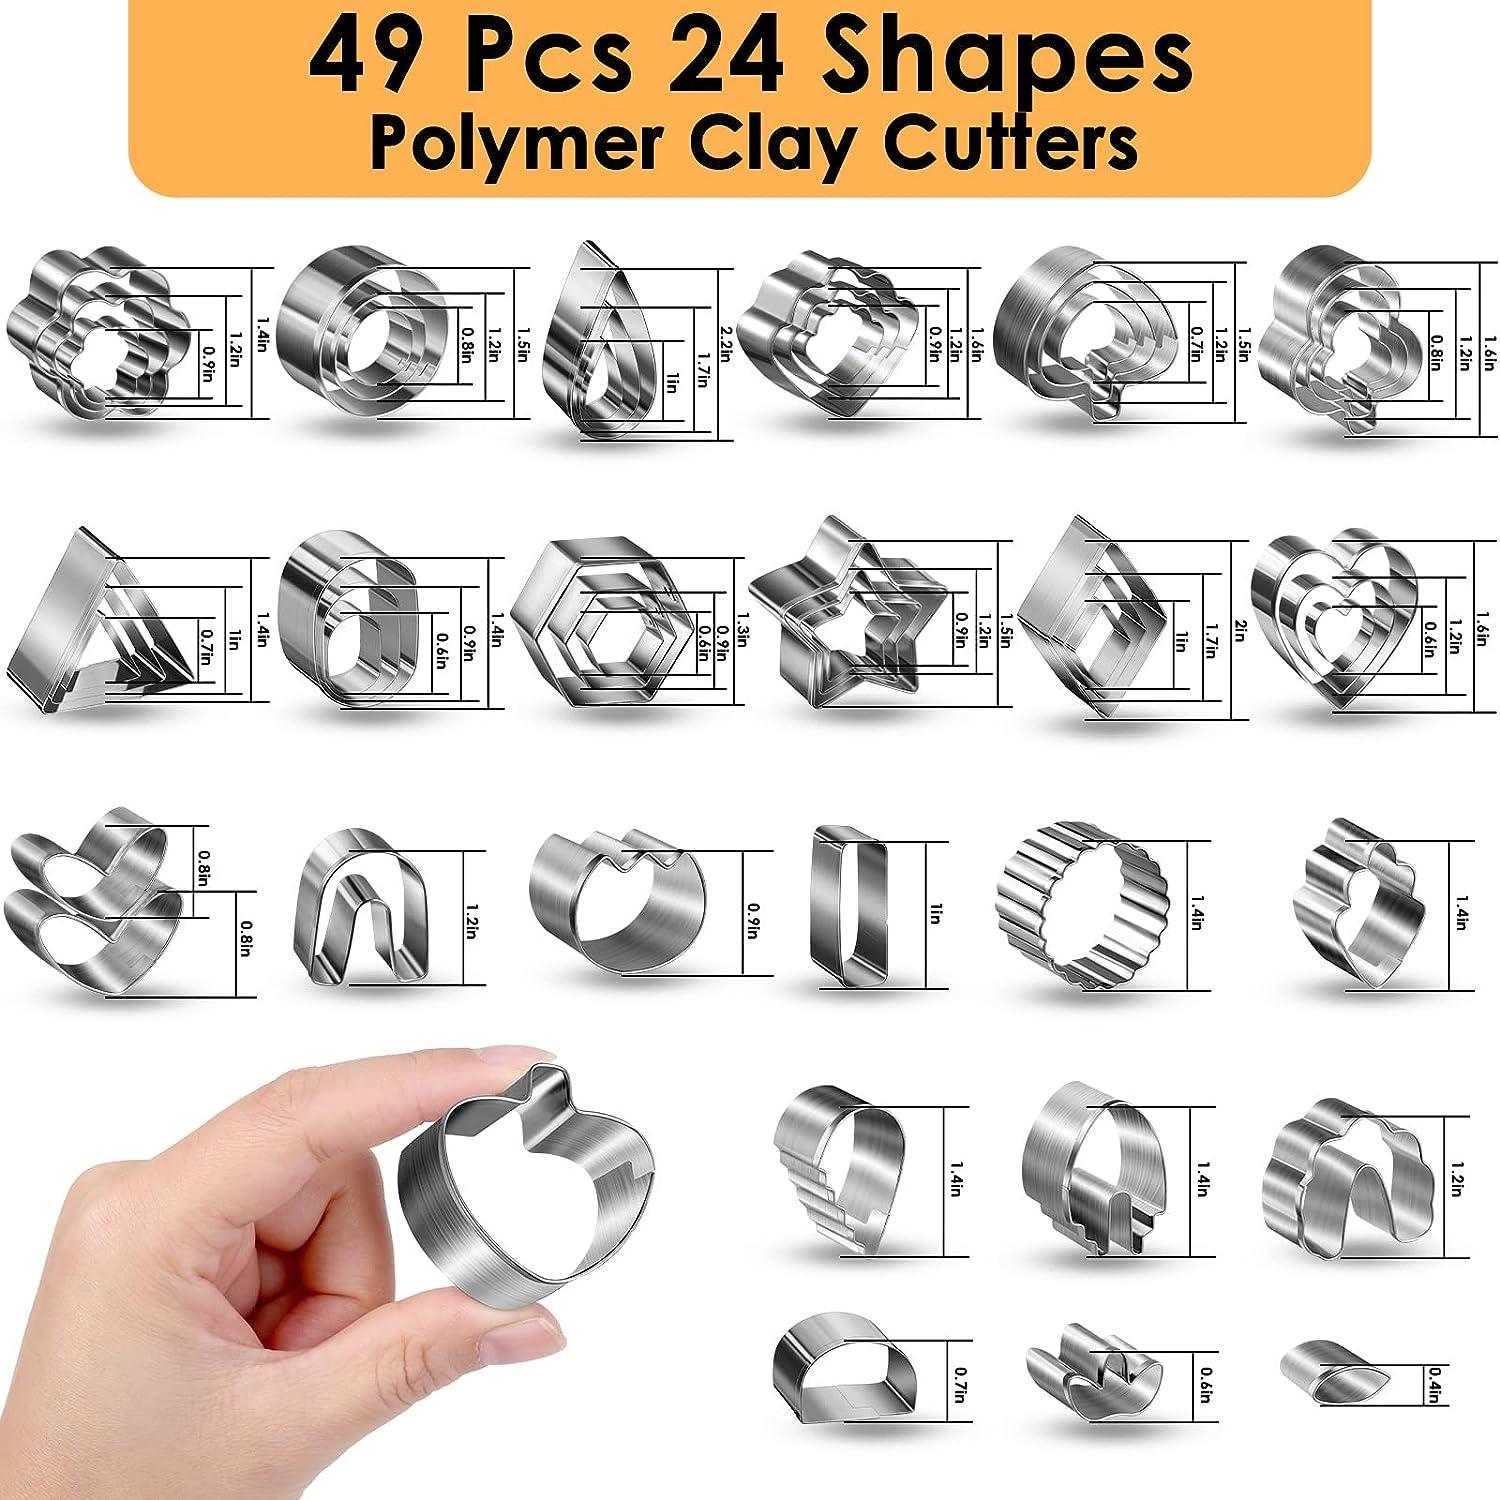 PTFJZ Polymer Clay Cutters for Earring Making 76pcs Clay Tools Set 67 Shapes Stainless Steel Clay Cutters with 8 Circle Shape Cutters 1 Clay Letter